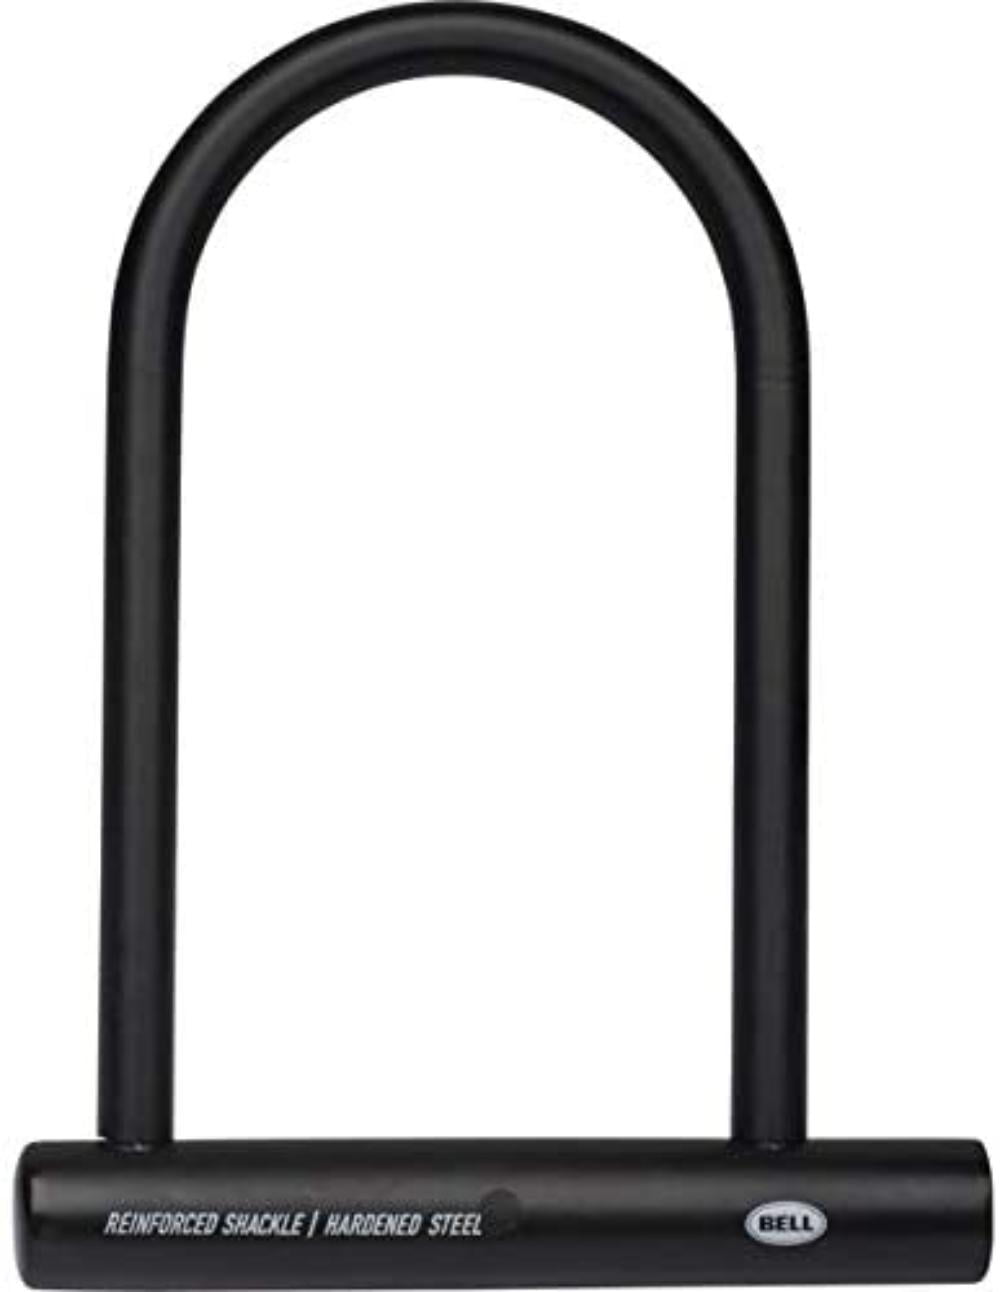 Bell U-Lock Level 4 Patented Anti-Theft Shackle for sale online 